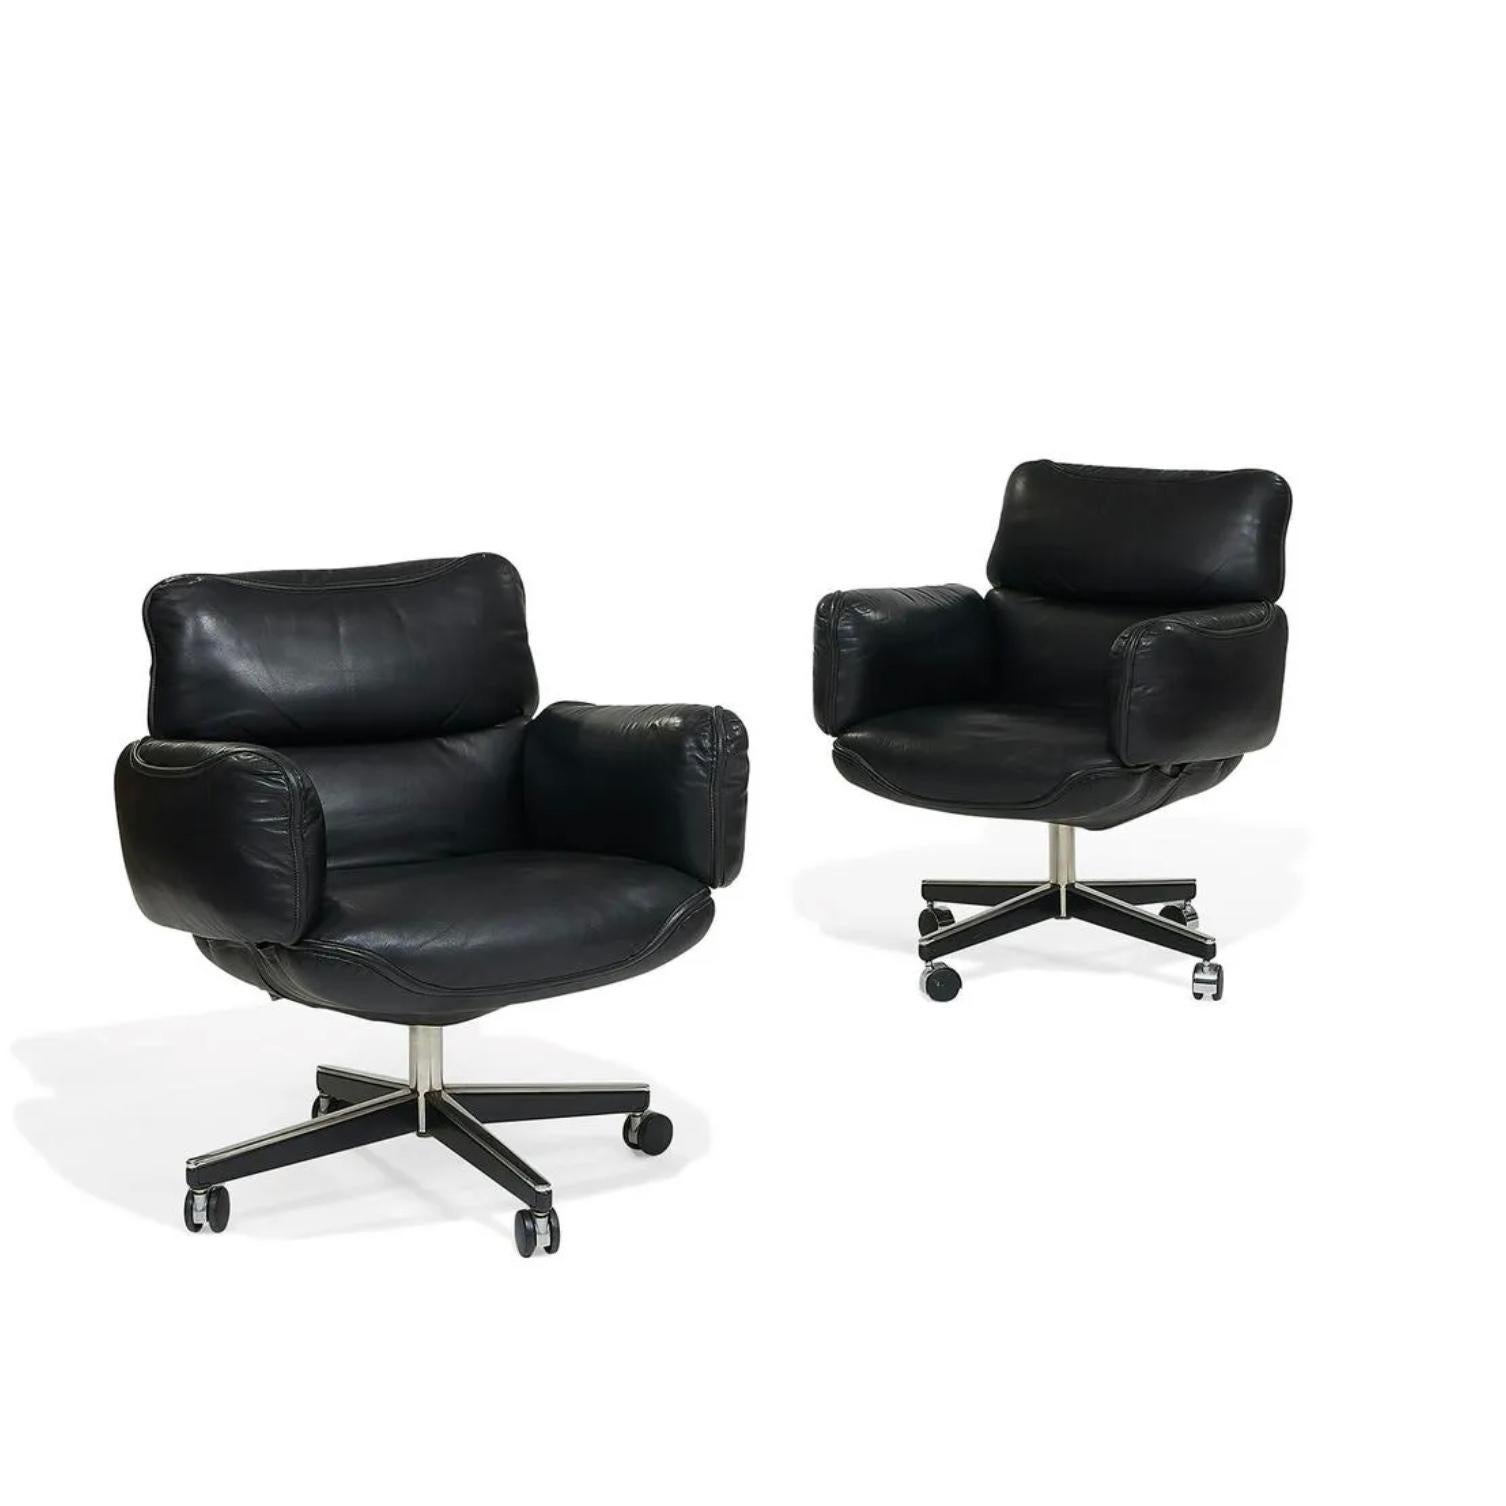 These gorgeous black leather executive management desk chairs are by Otto Zapf for Knoll International, labelled and dated 1974. Constructed of heavily cushioned sections, with the top head section and arms removable. The chair base is height and